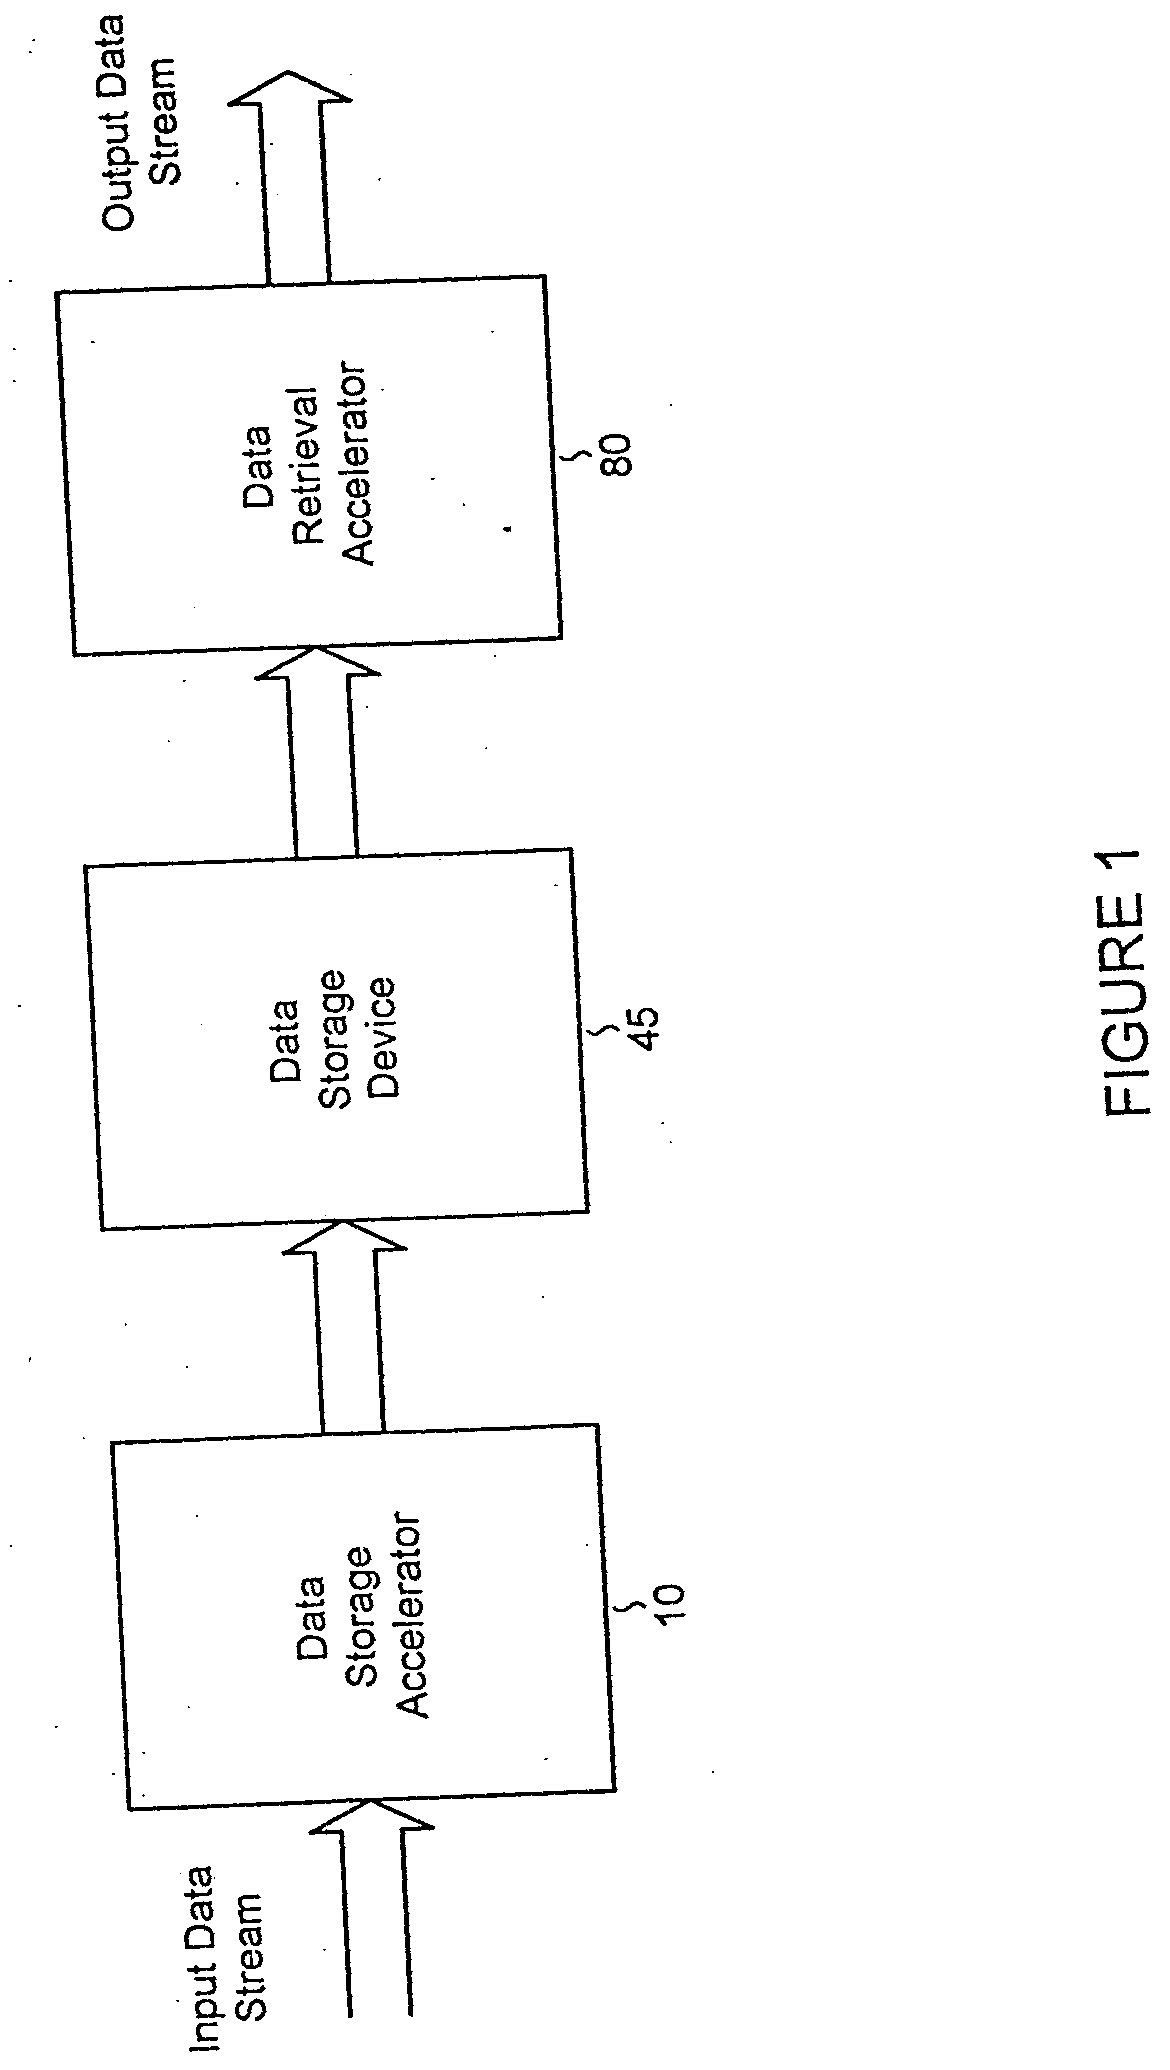 System and methods for accelerated data storage and retrieval